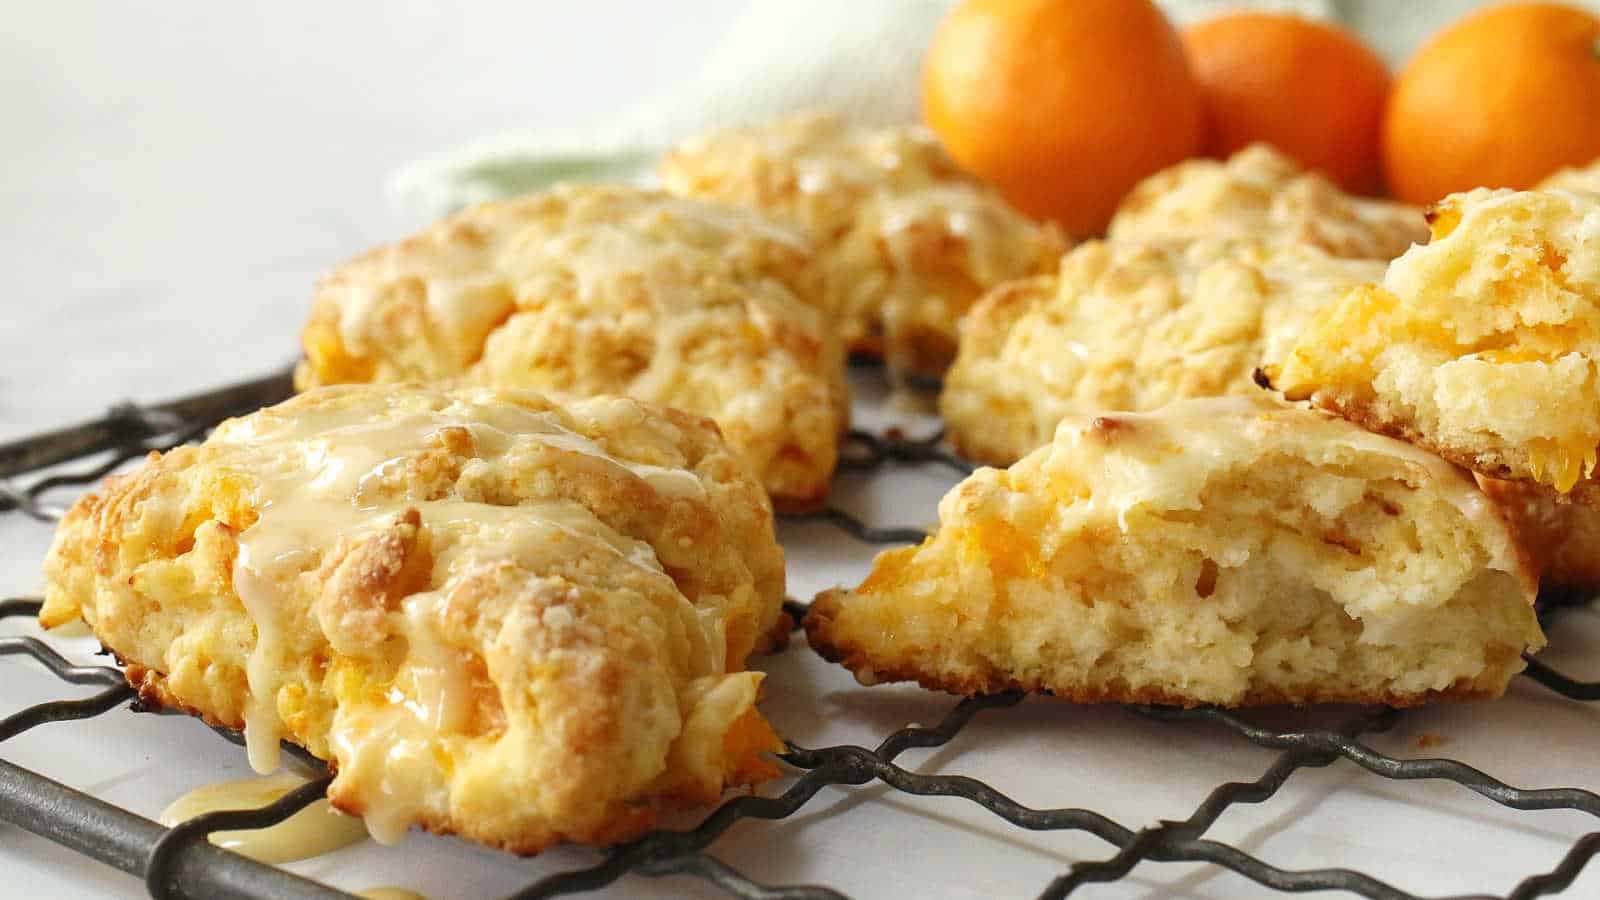 Orange scones on a wire rack with oranges in the background.